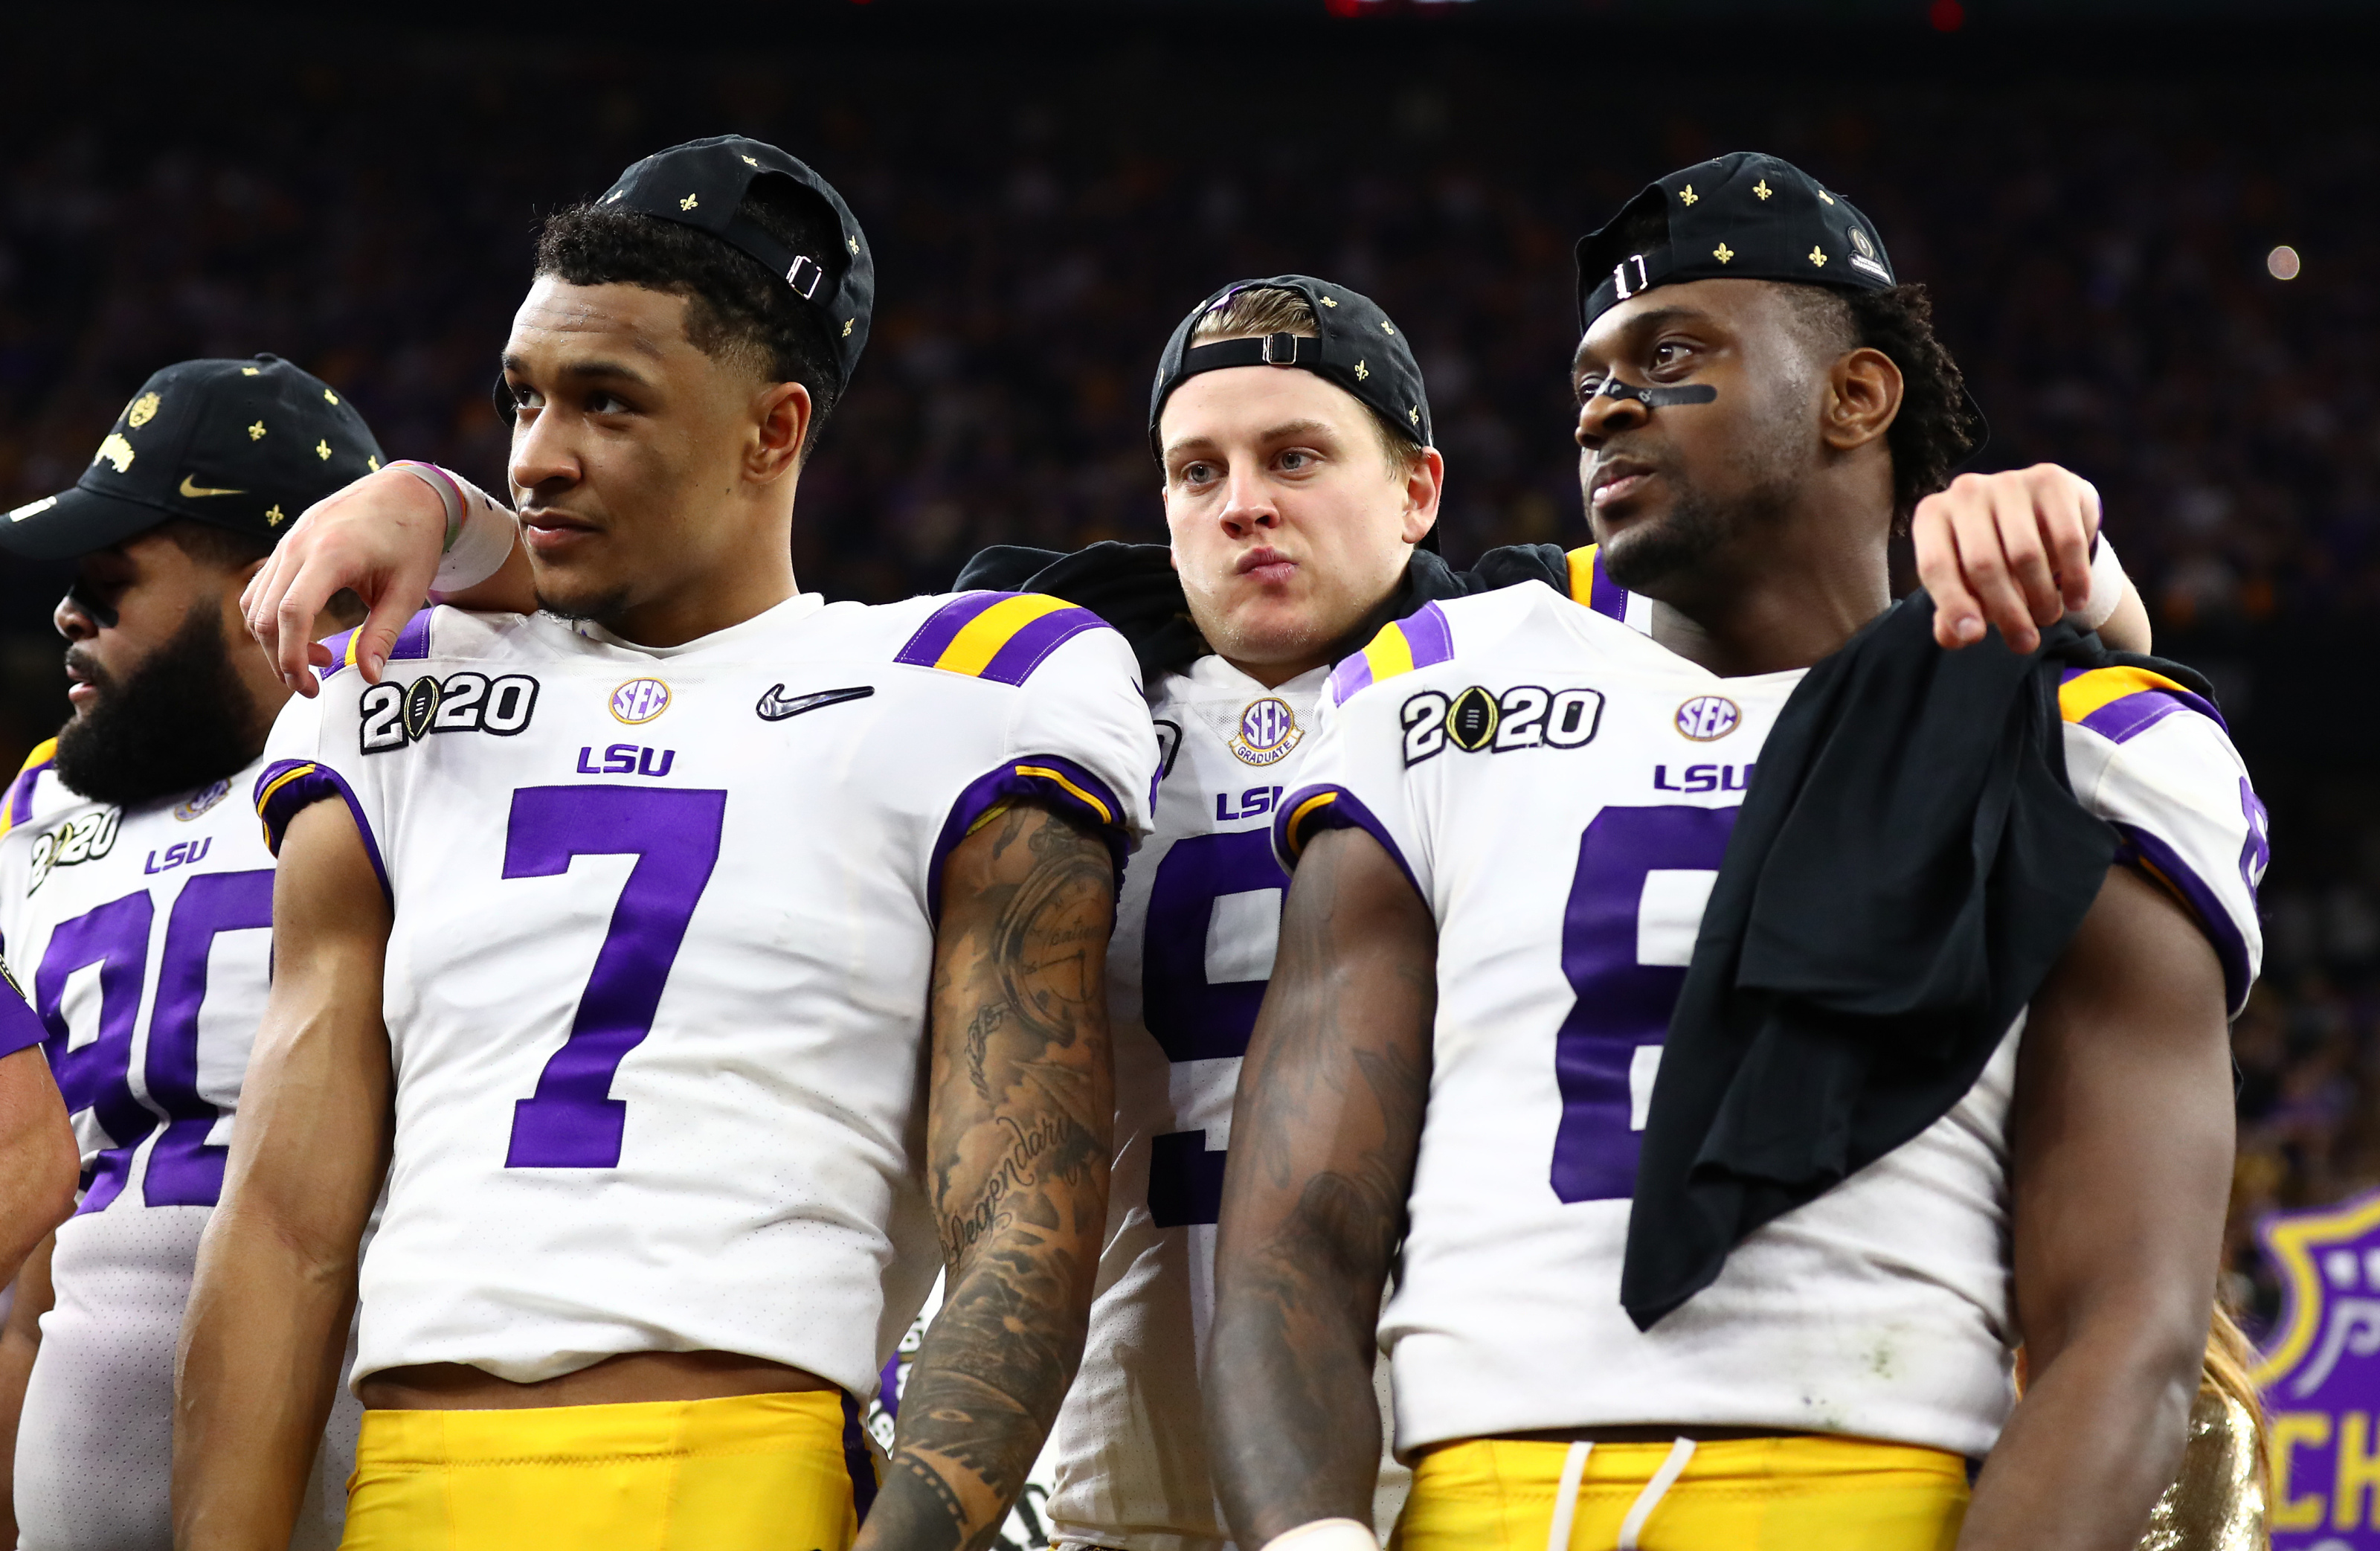 Best college football teams in 2020 after LSU's national title